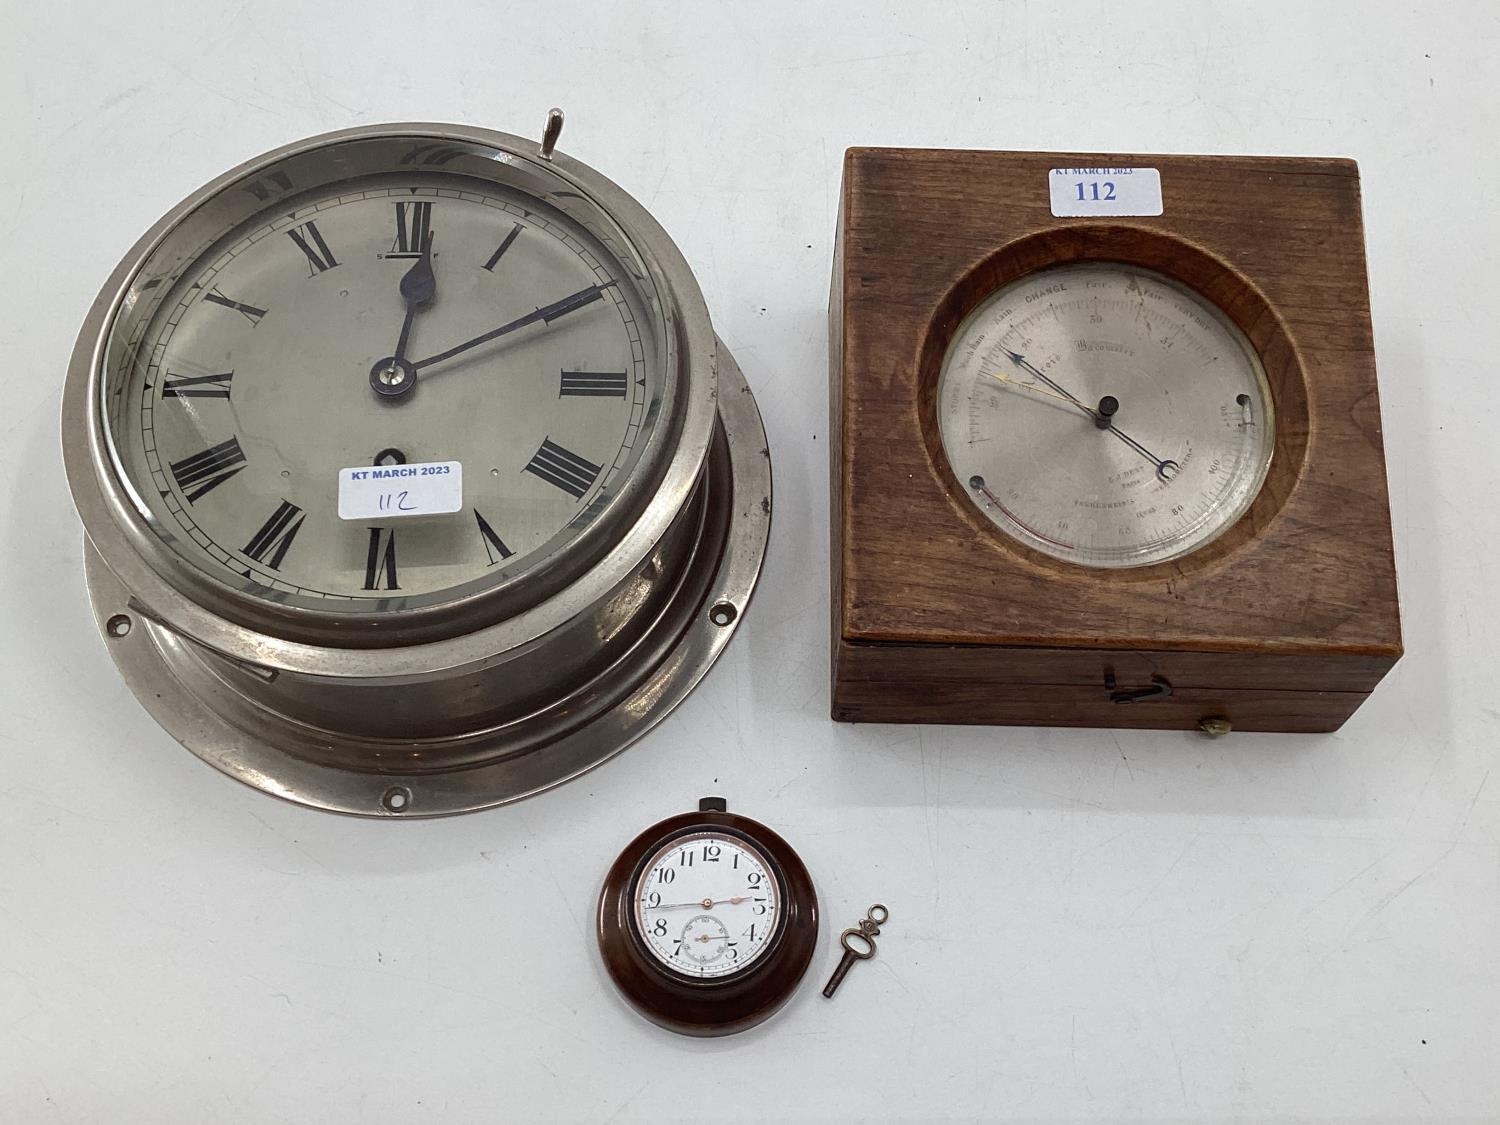 A boxed gilt brass ships barometer in oak case by E J Dent, Paris, and a ships clock and a small